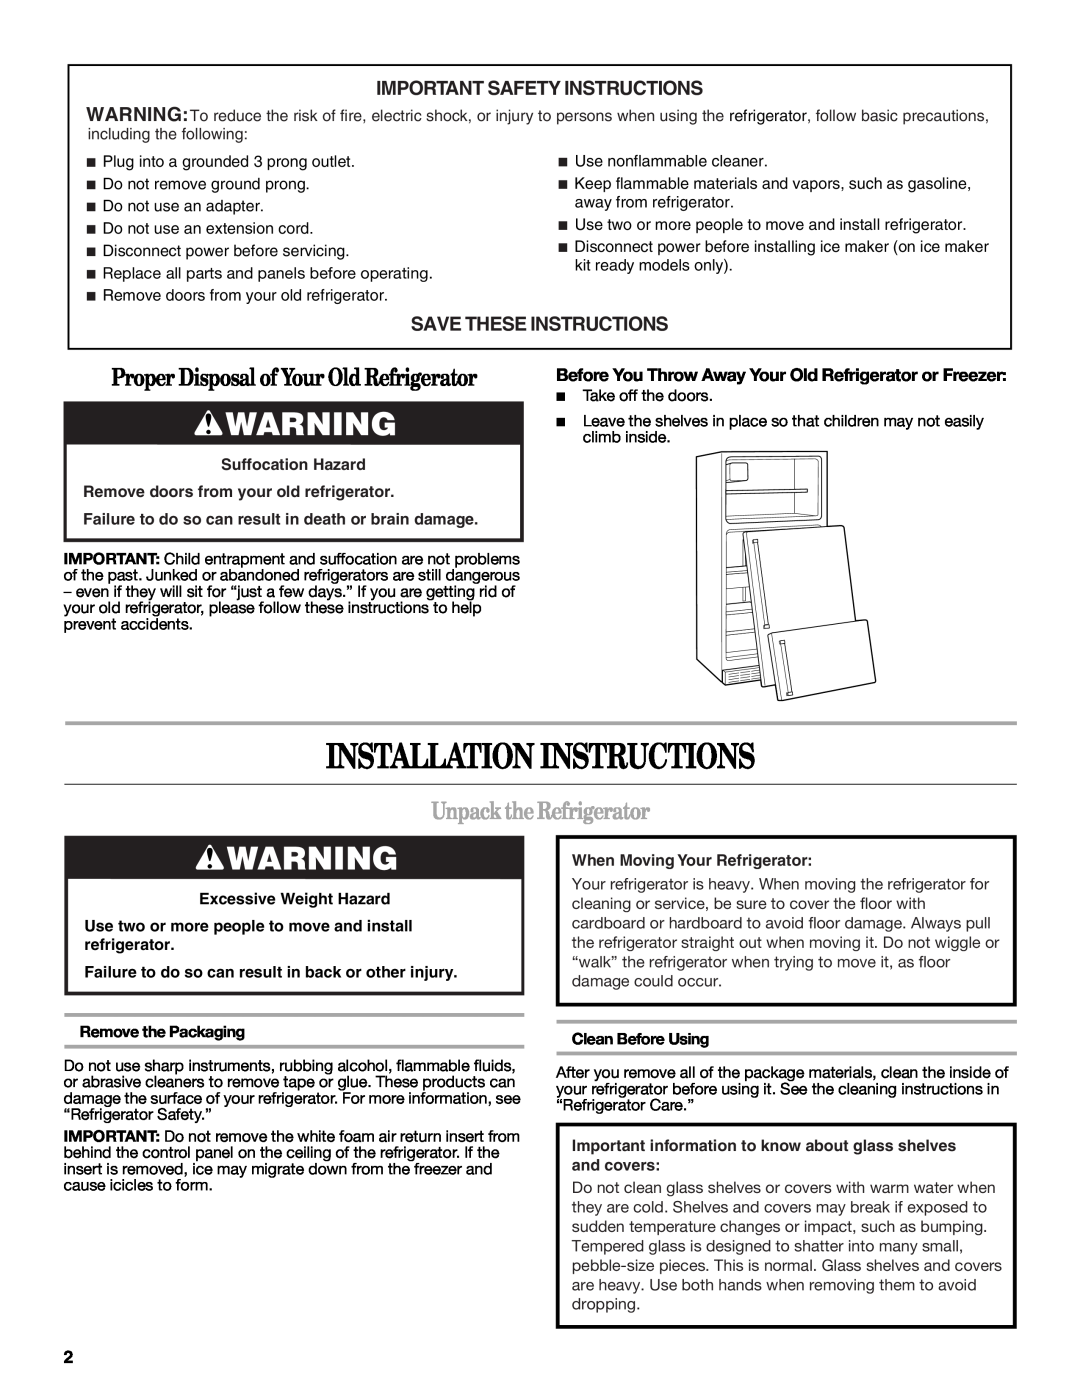 Whirlpool WRT359SFYM Installation Instructions, Unpack the Refrigerator, Important Safety Instructions, Clean Before Using 